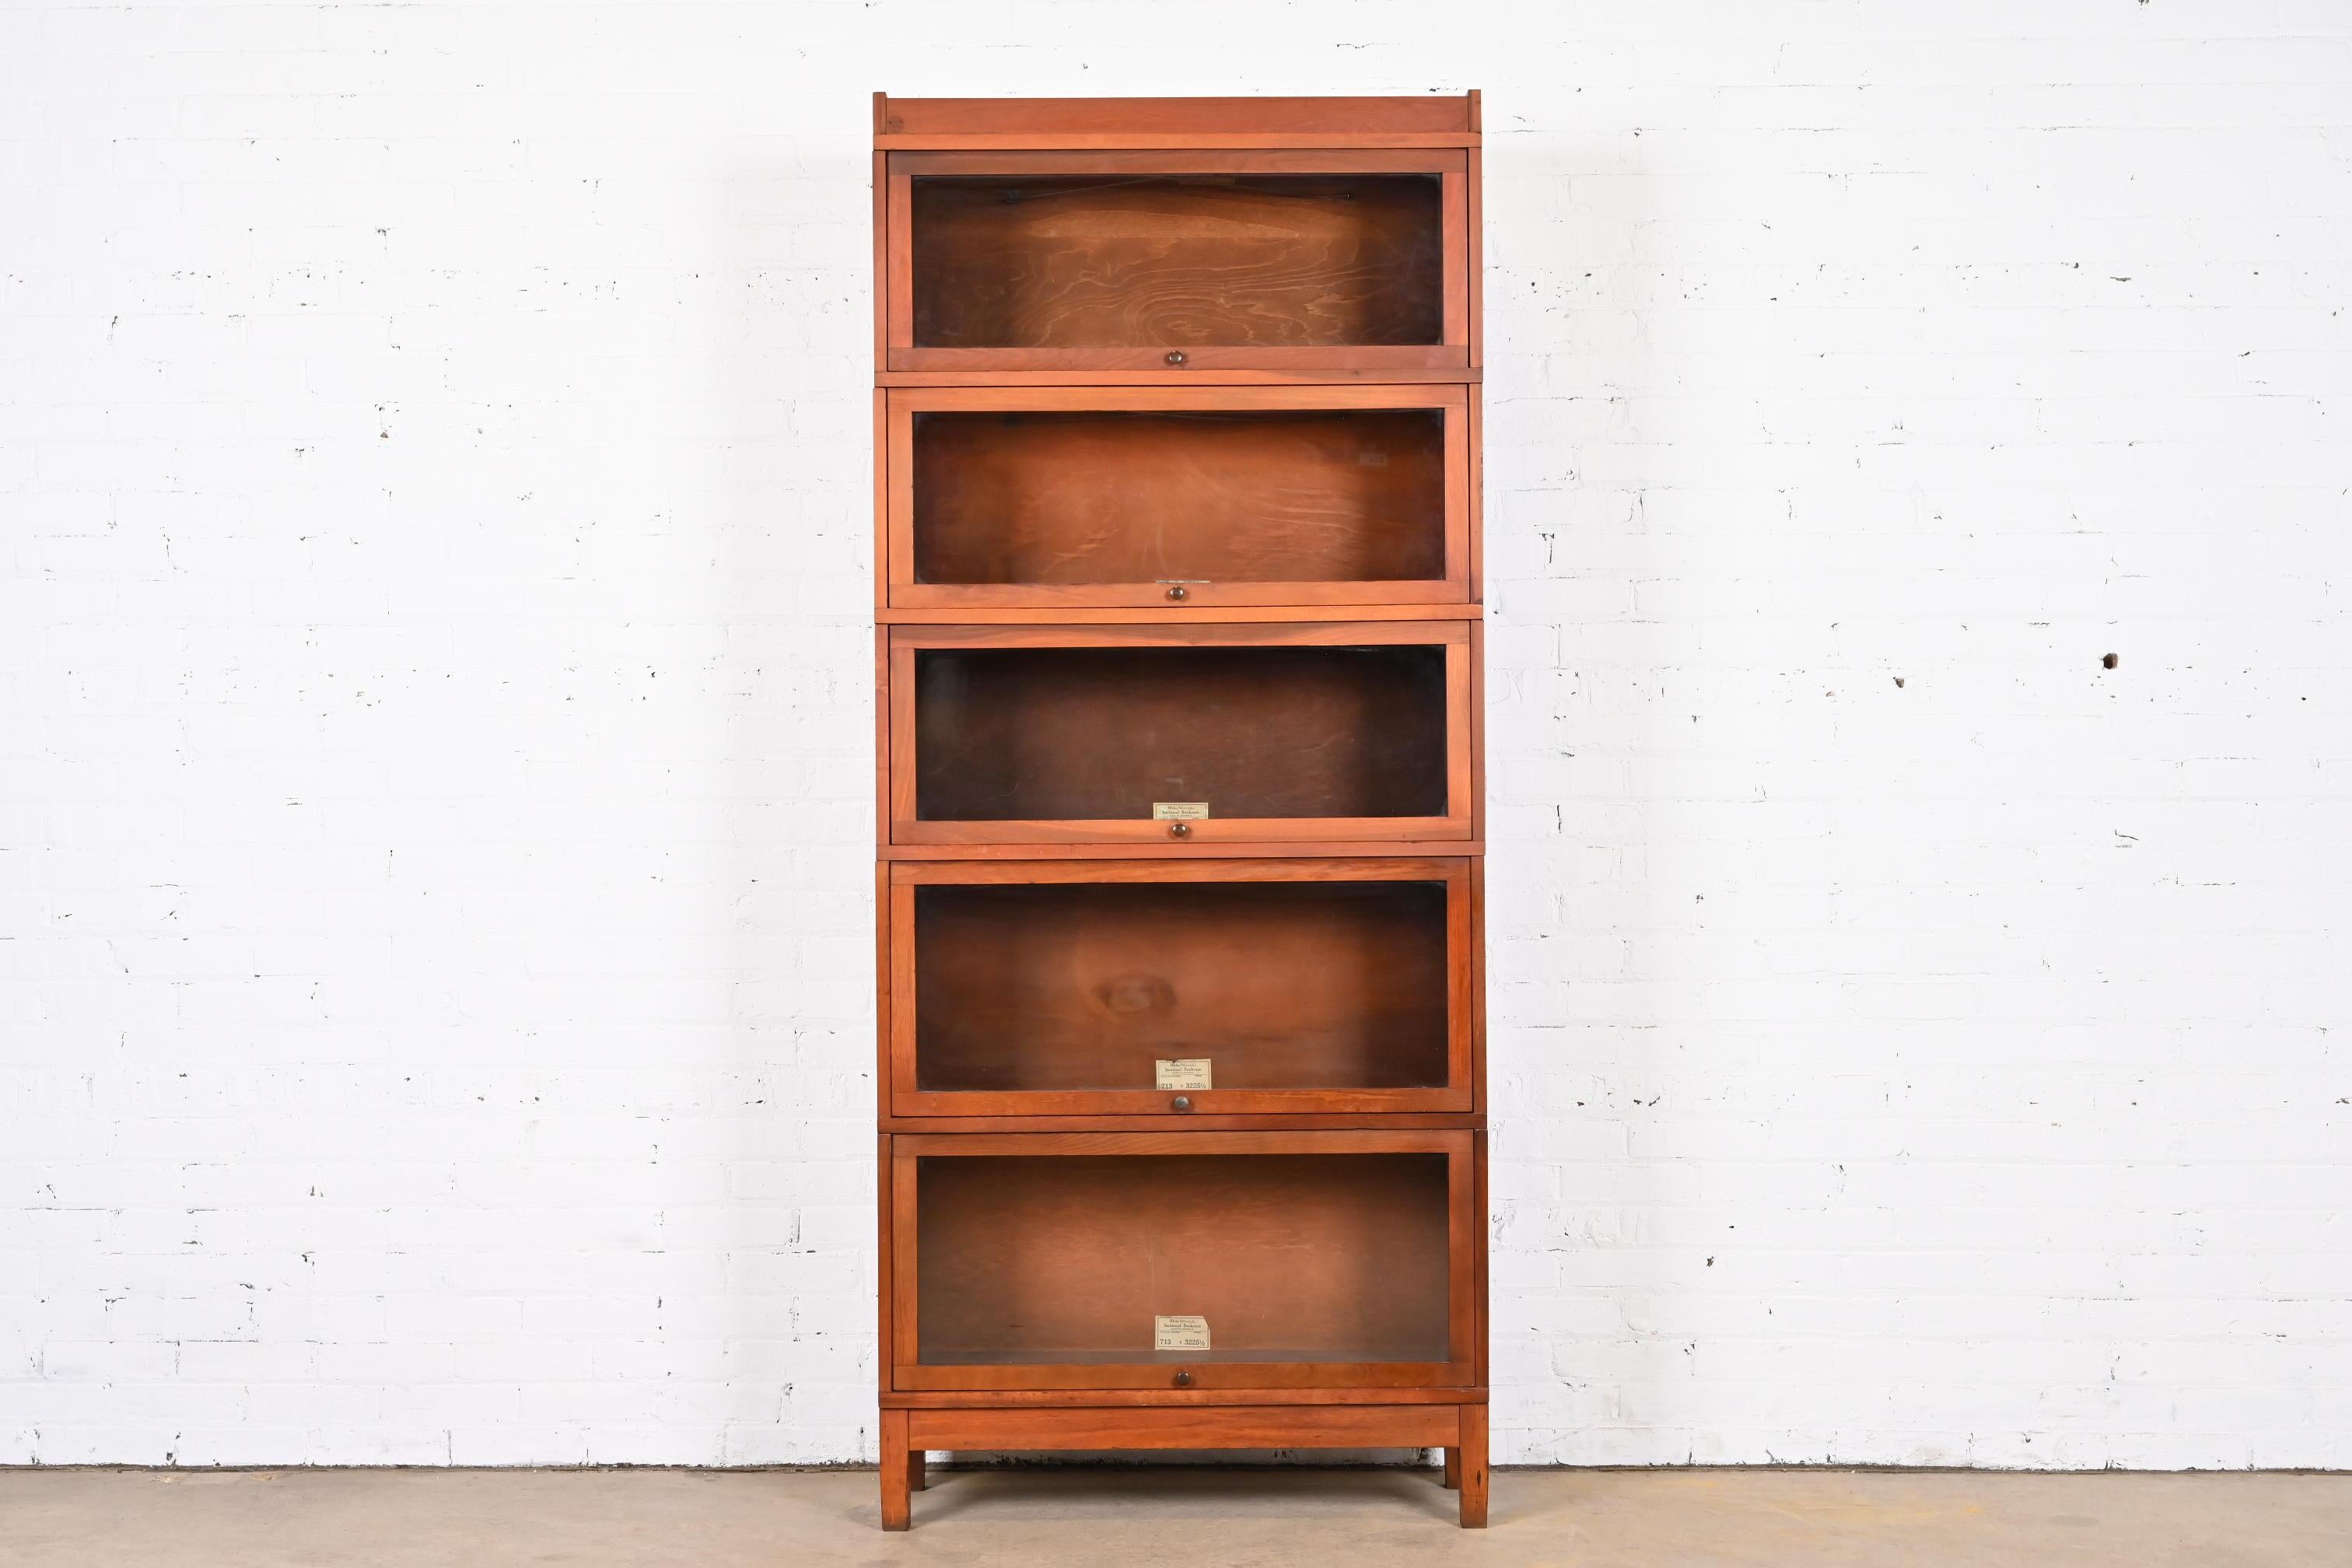 Antique Globe Wernicke Arts & Crafts Mahogany Five-Stack Barrister Bookcase In Good Condition For Sale In South Bend, IN